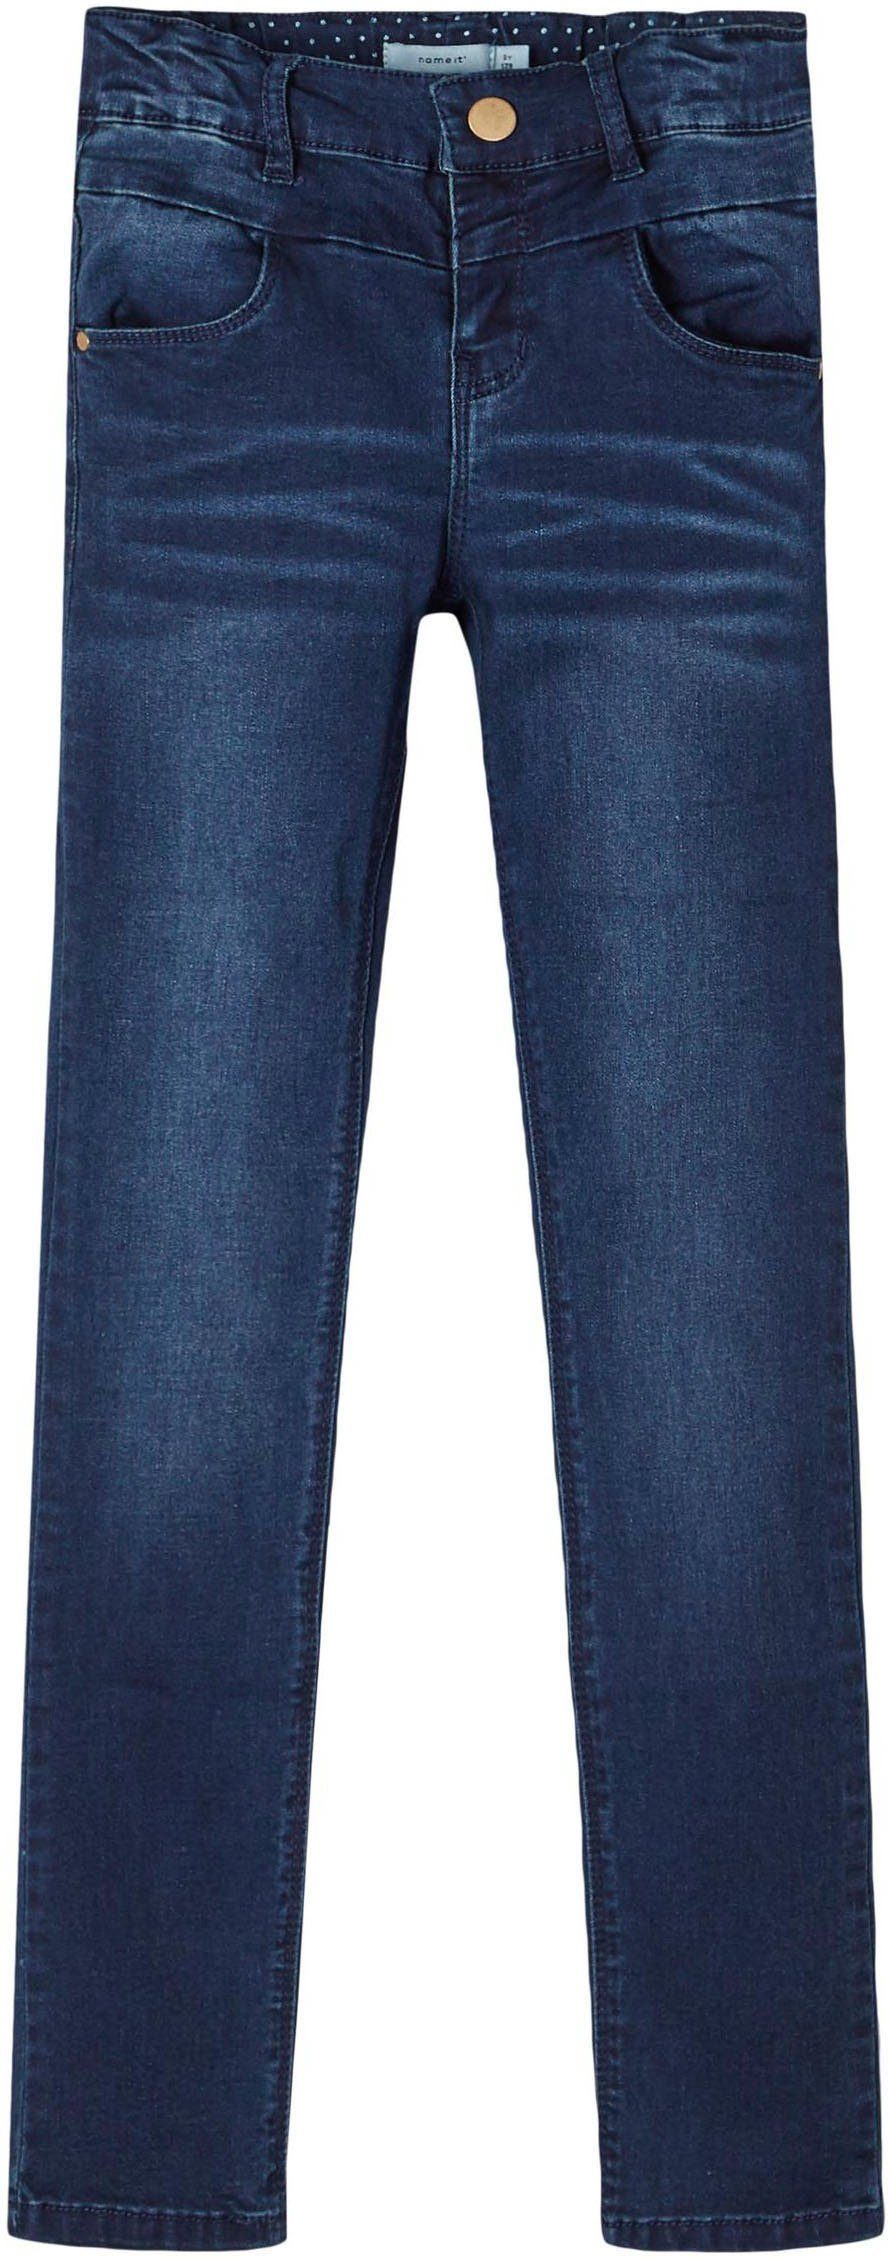 NKFPOLLY in Name Stretch-Jeans It schmaler Passform